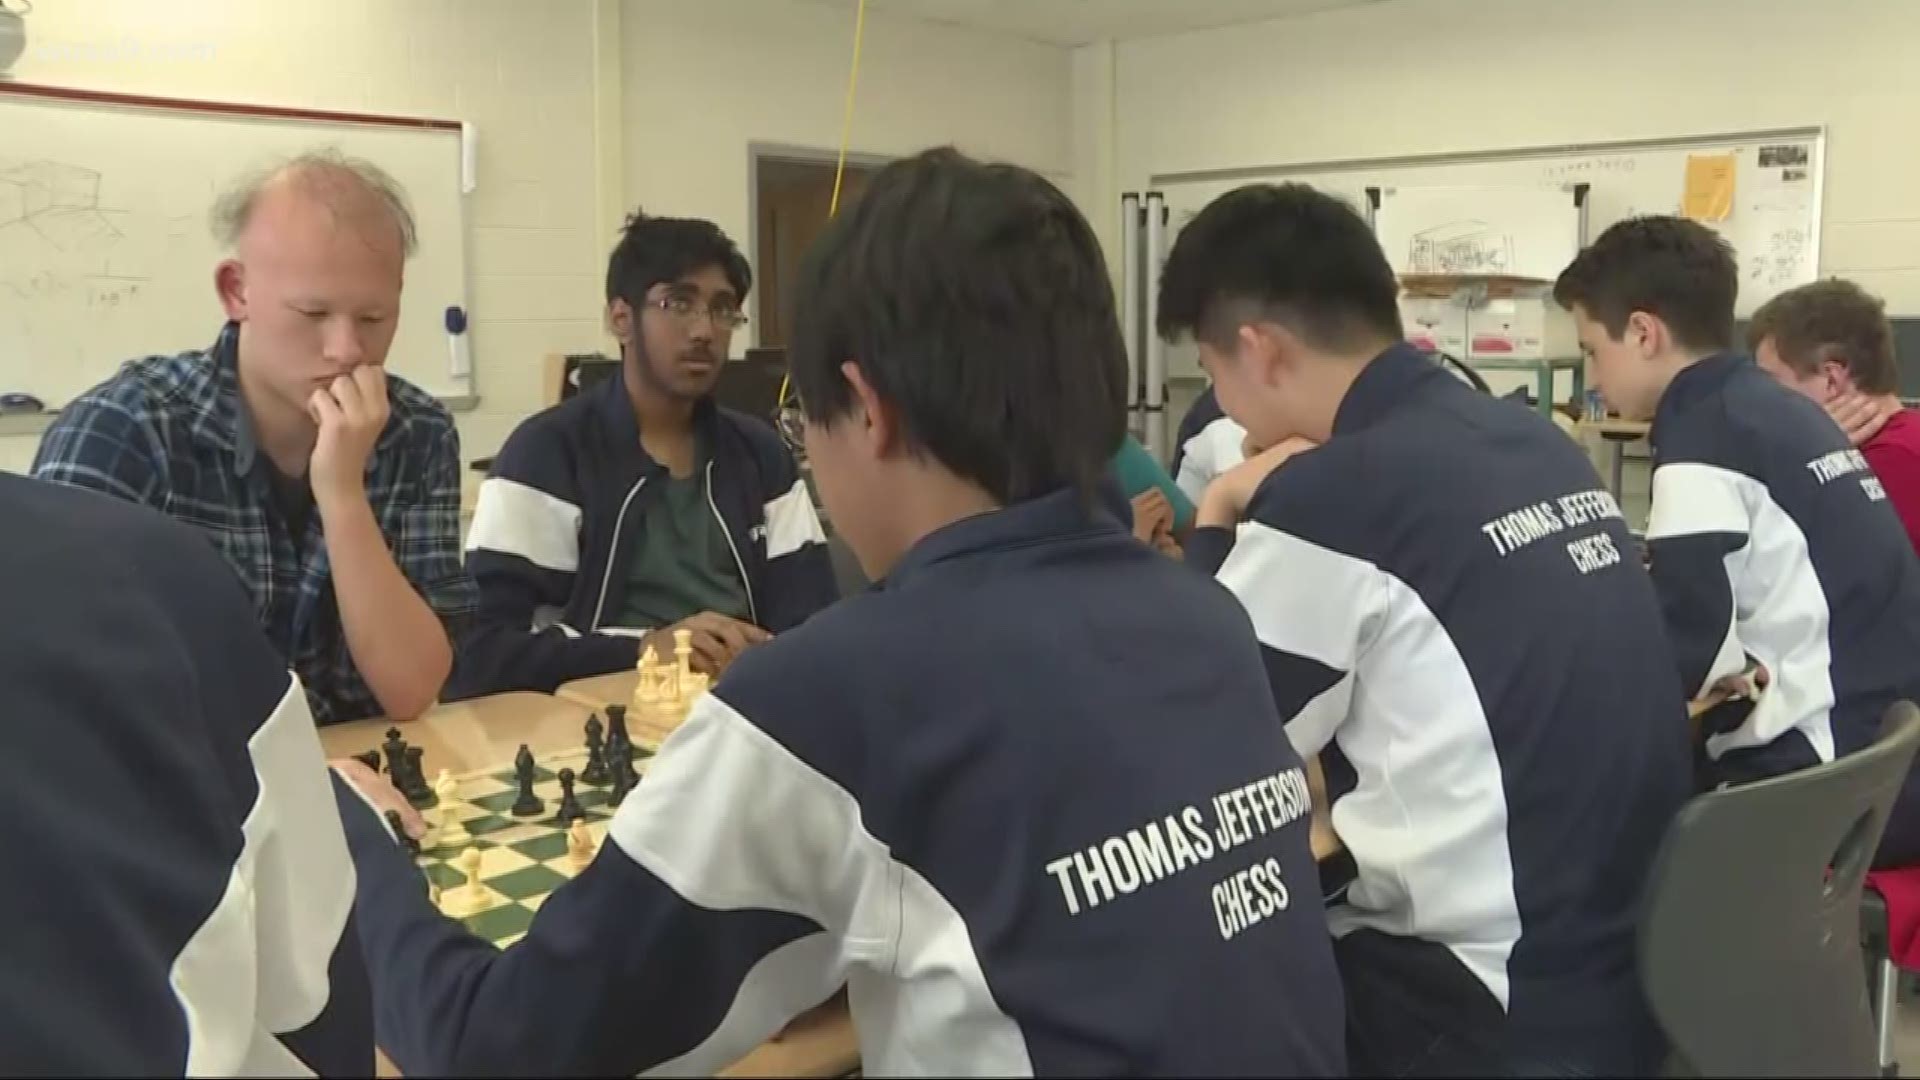 For the second year in a row, Thomas Jefferson High School won chess championship. Congrats!